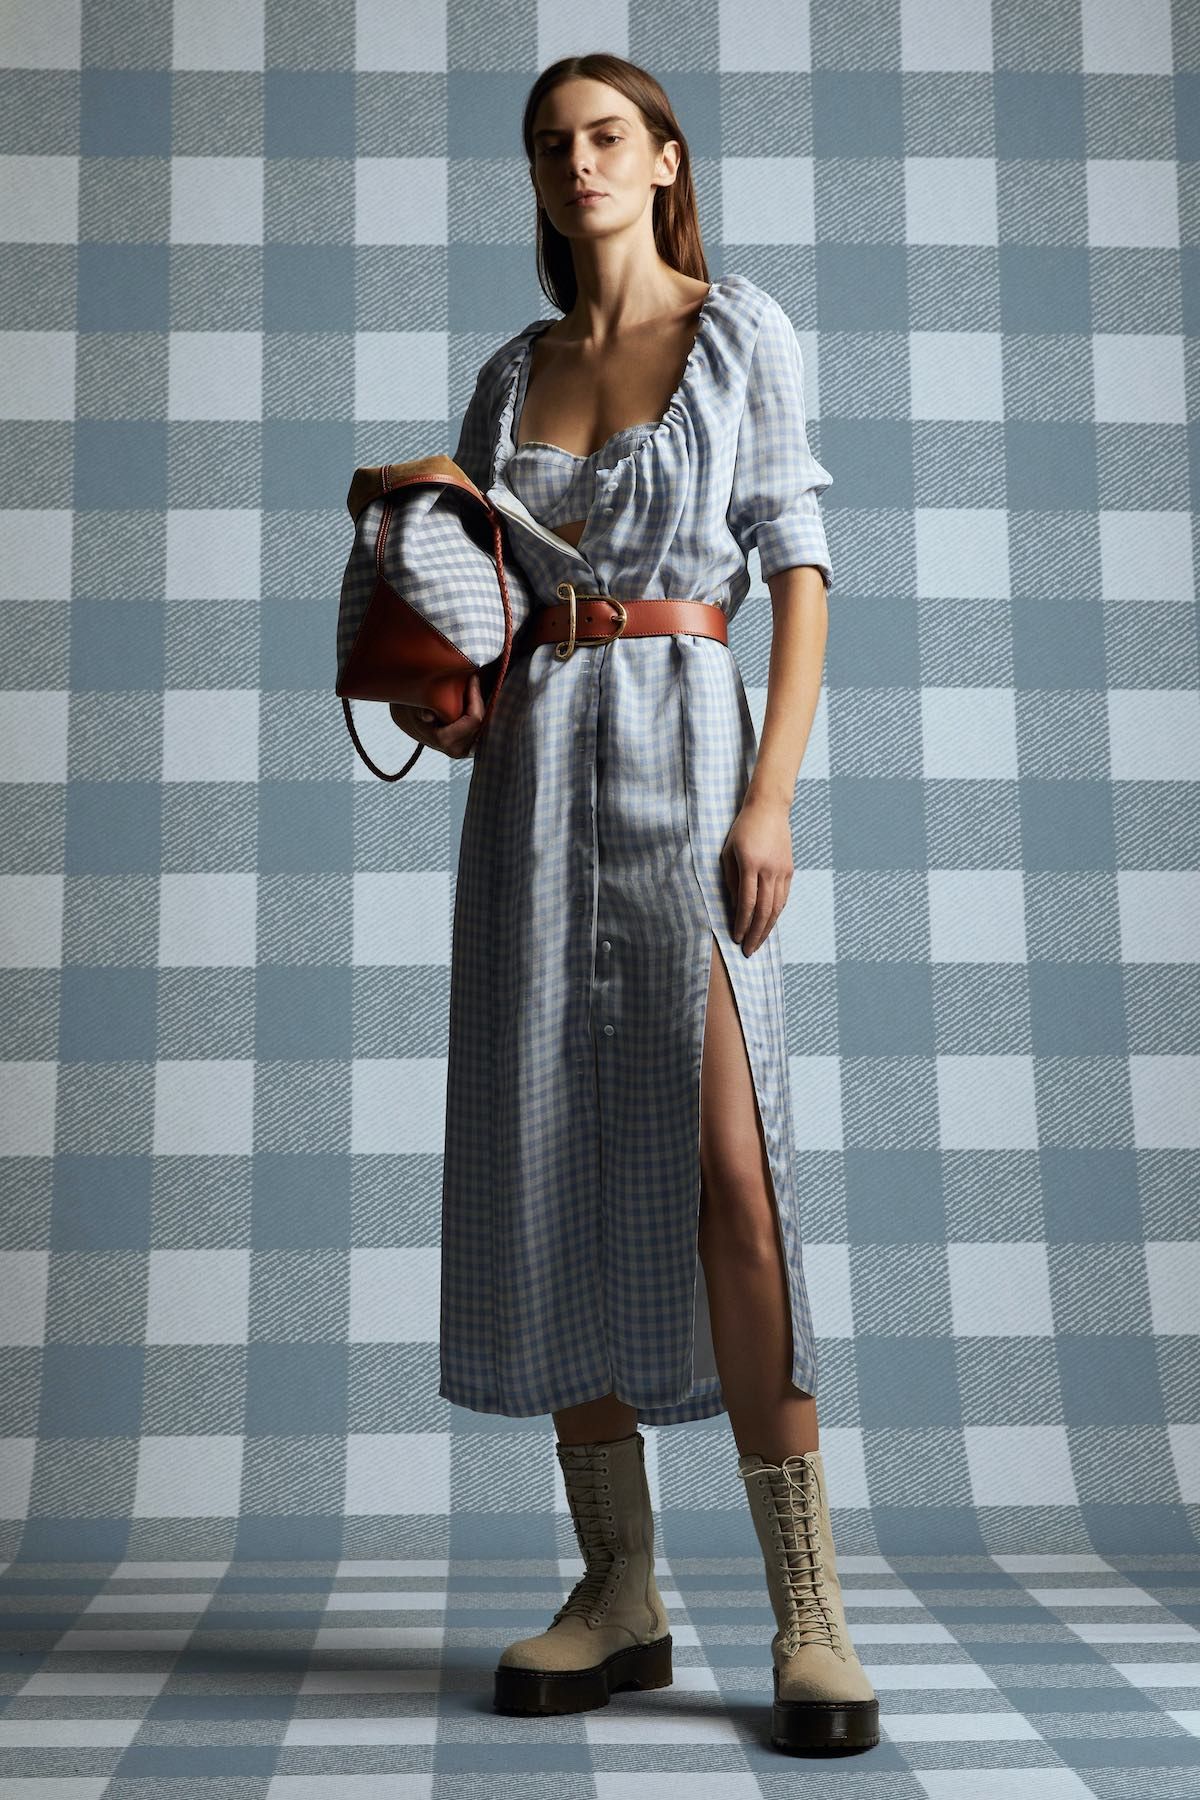 All the Best Fashion from the Resort 2021 Collections: Photos